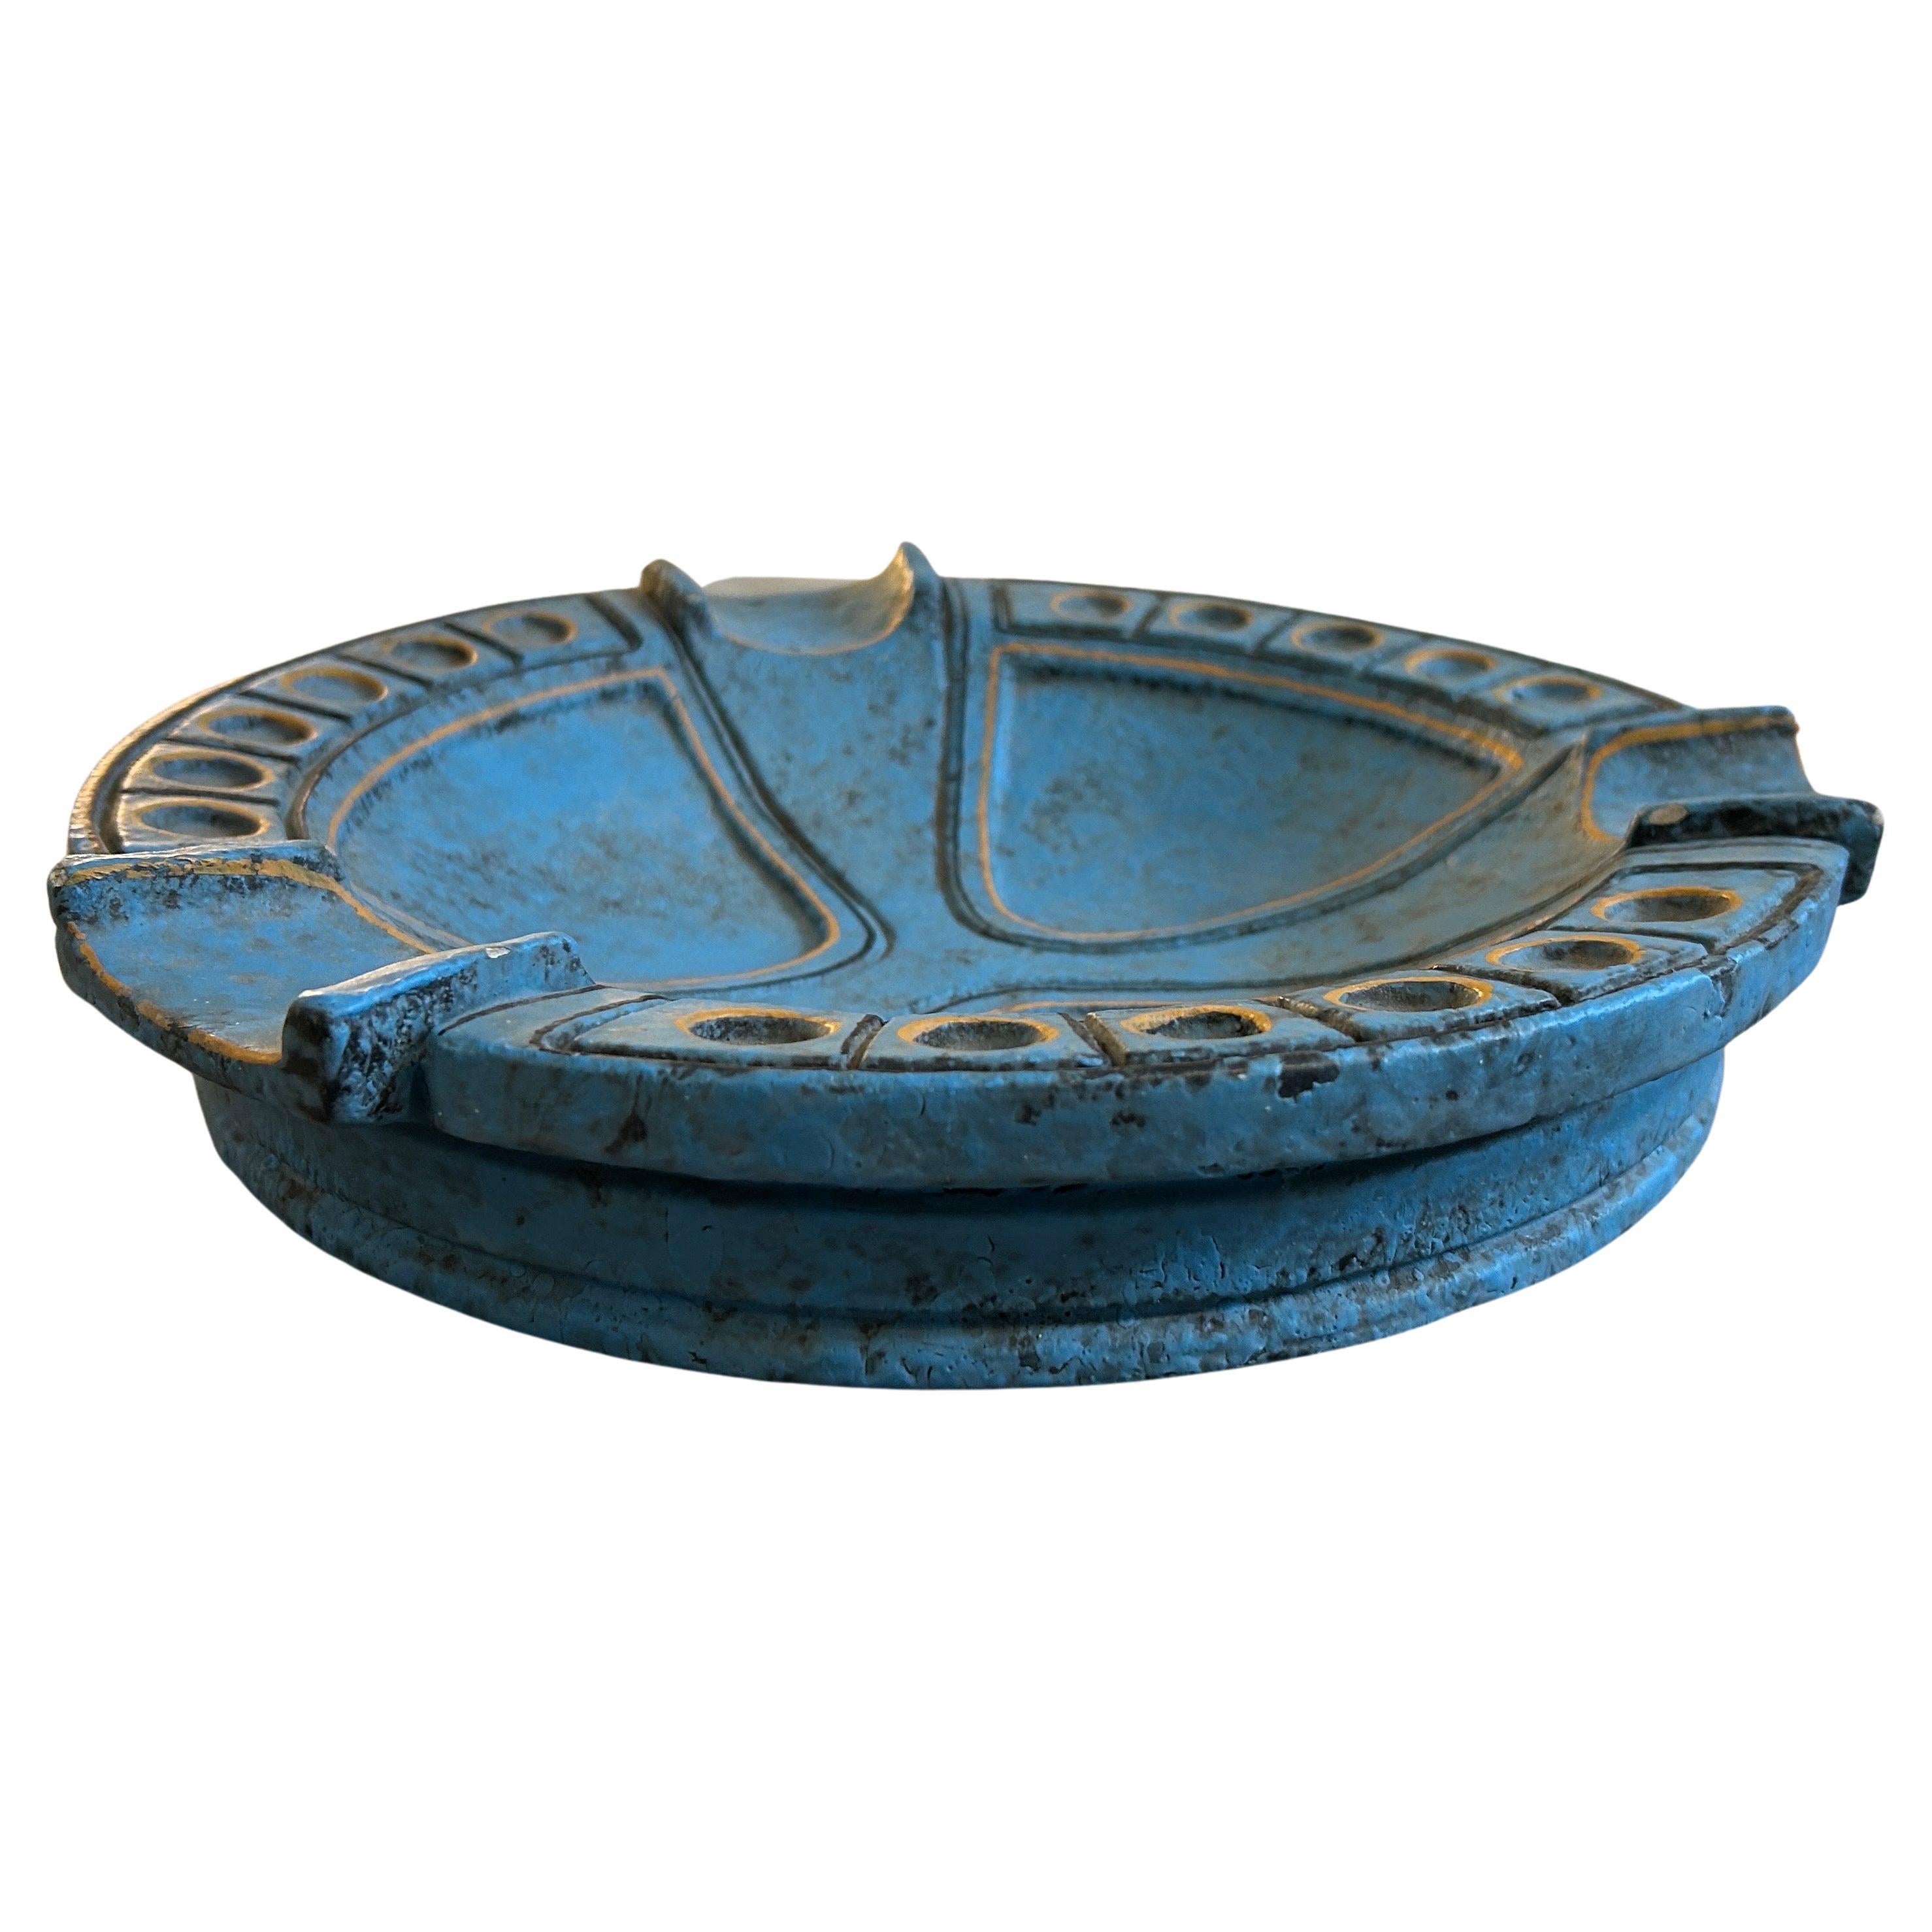 This Ceramic Italian Ashtray by Casucci in Chianciano is a unique and visually captivating decorative piece that pays homage to the Etruscan art and design influences of the 1960s. The ashtray is made of ceramic, a versatile and traditional material